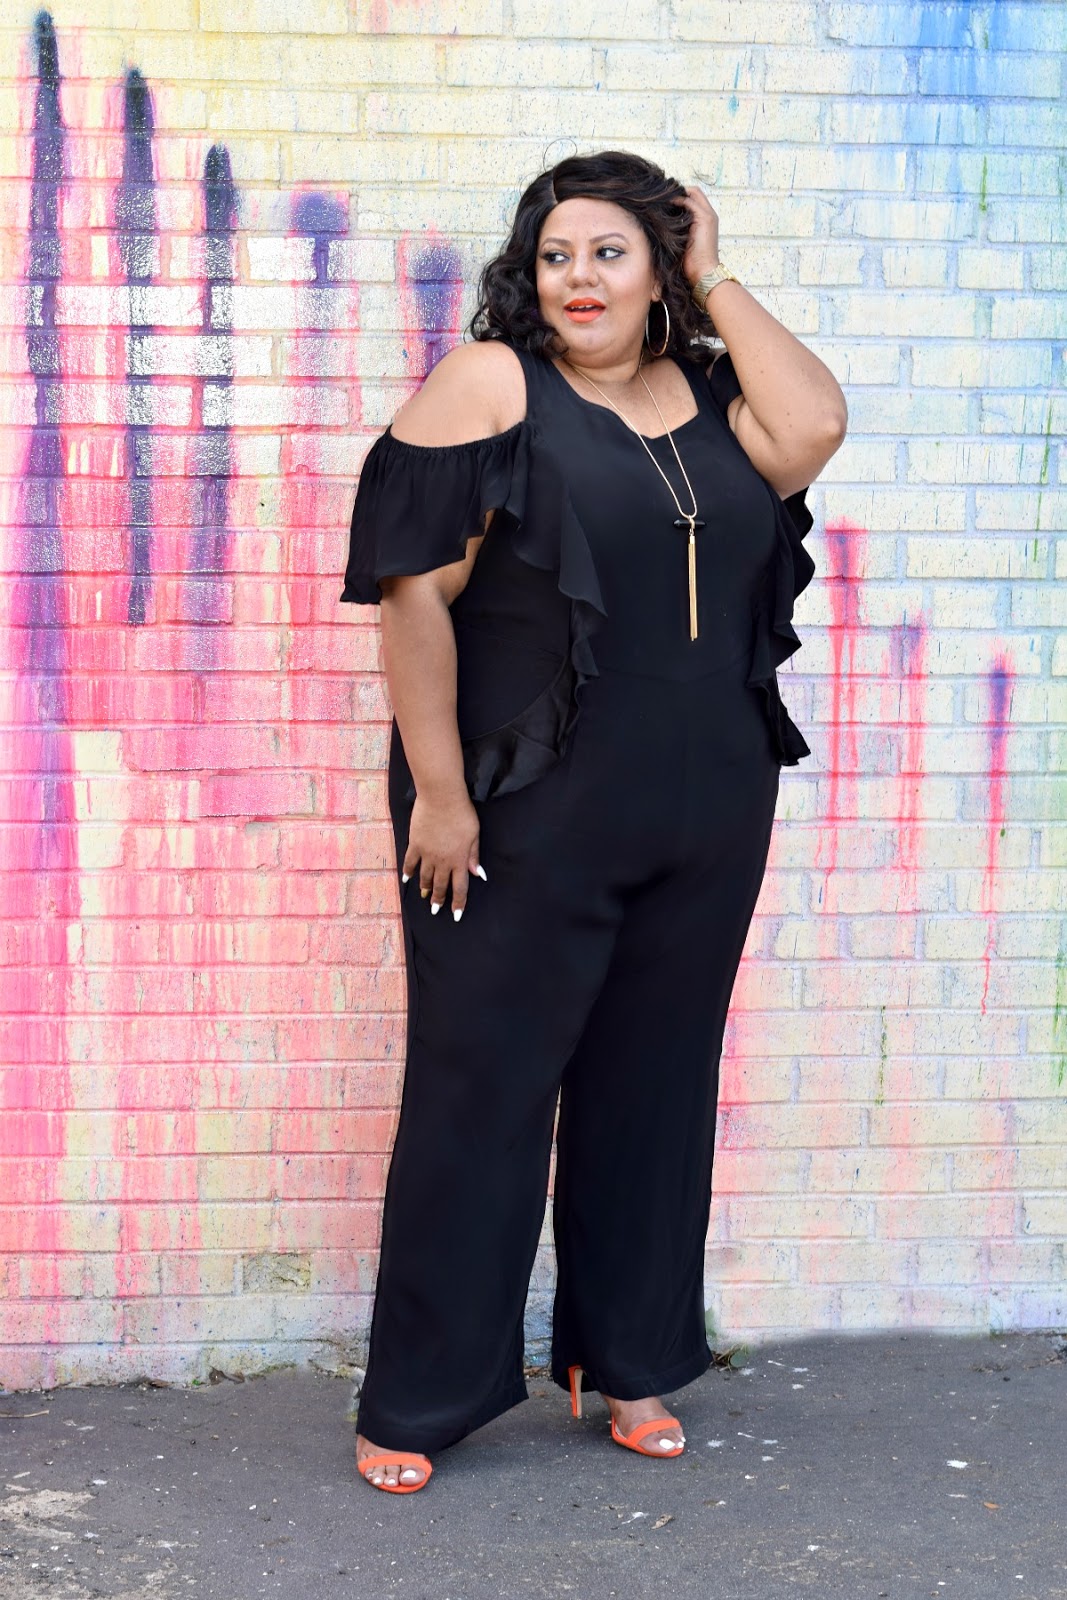 Jumping into Jumpsuits!! - The Real Sample Size